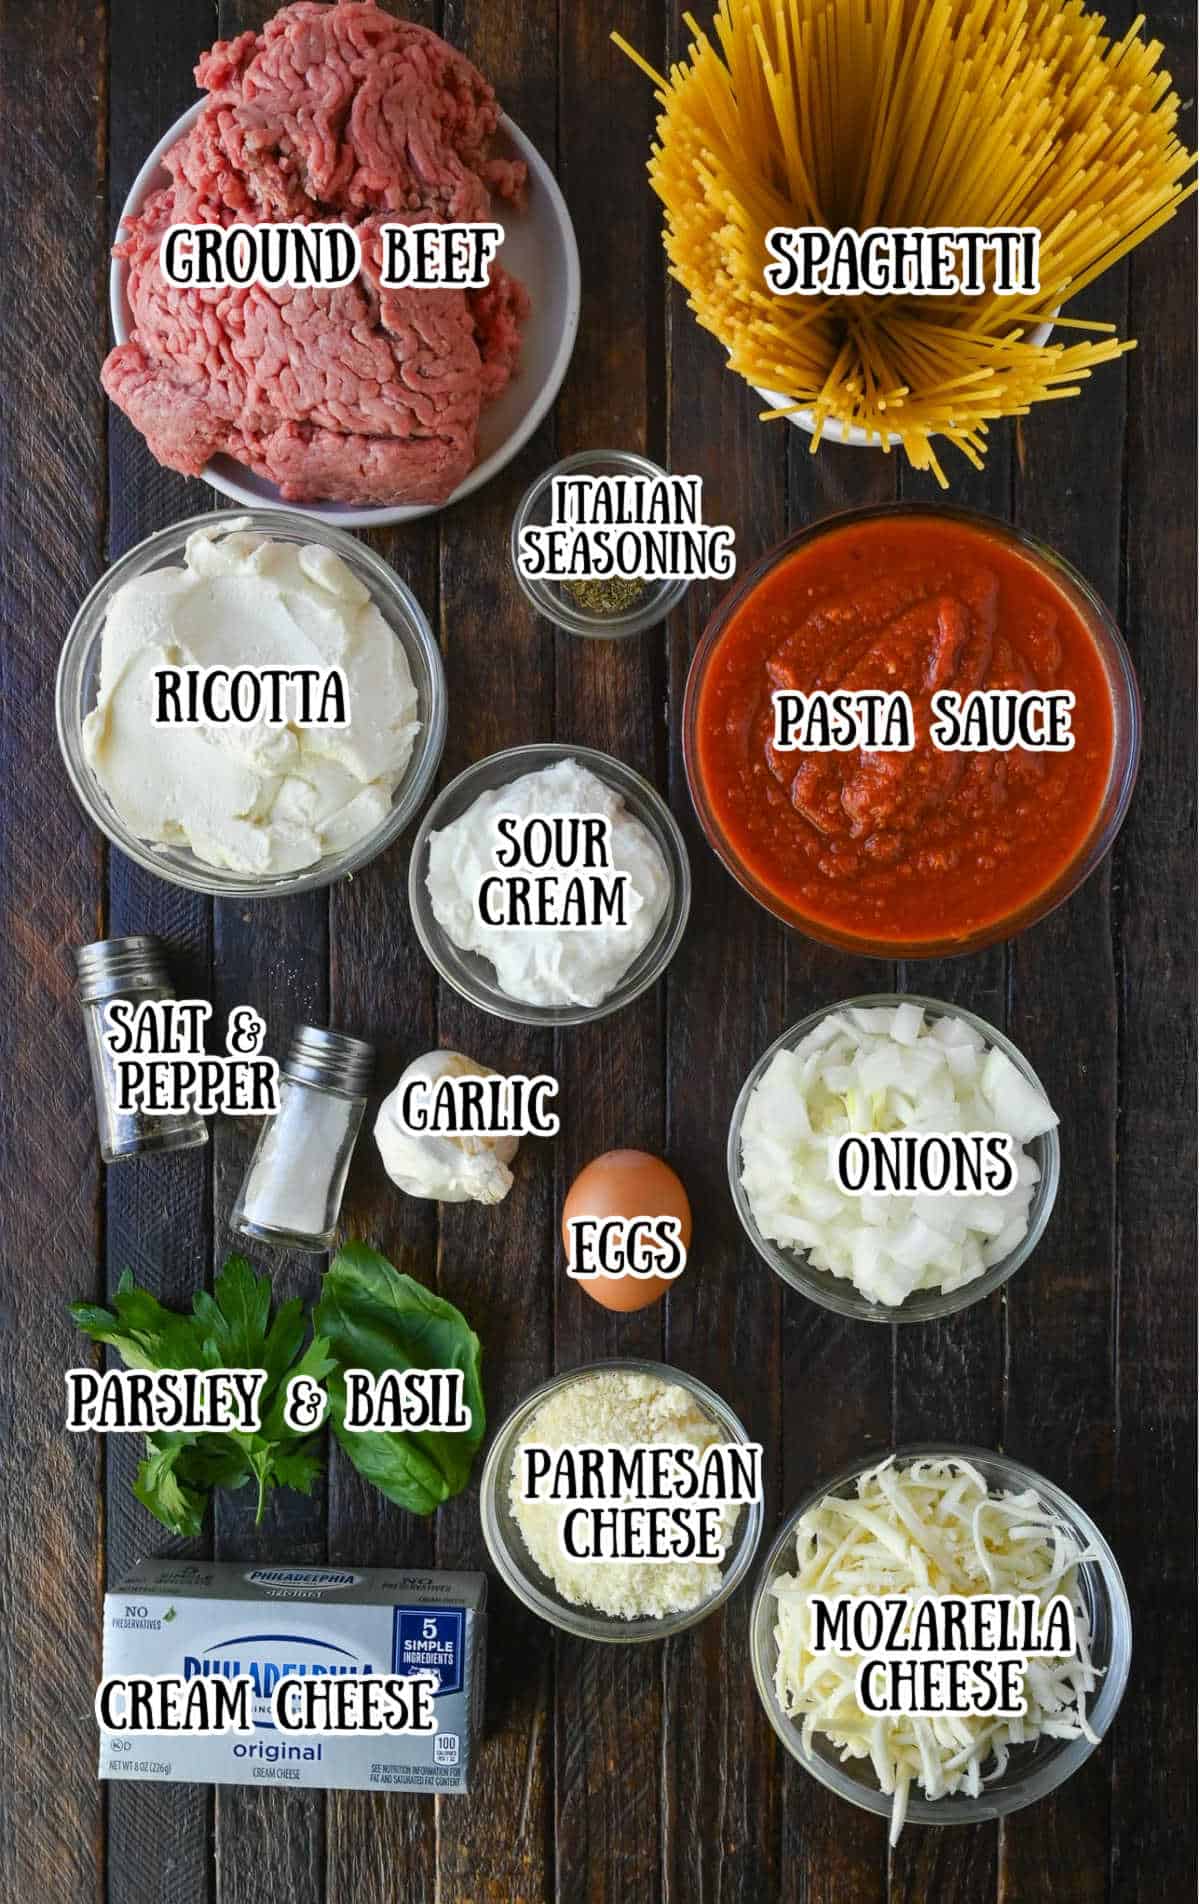 All the ingredients needed for this baked spaghetti.